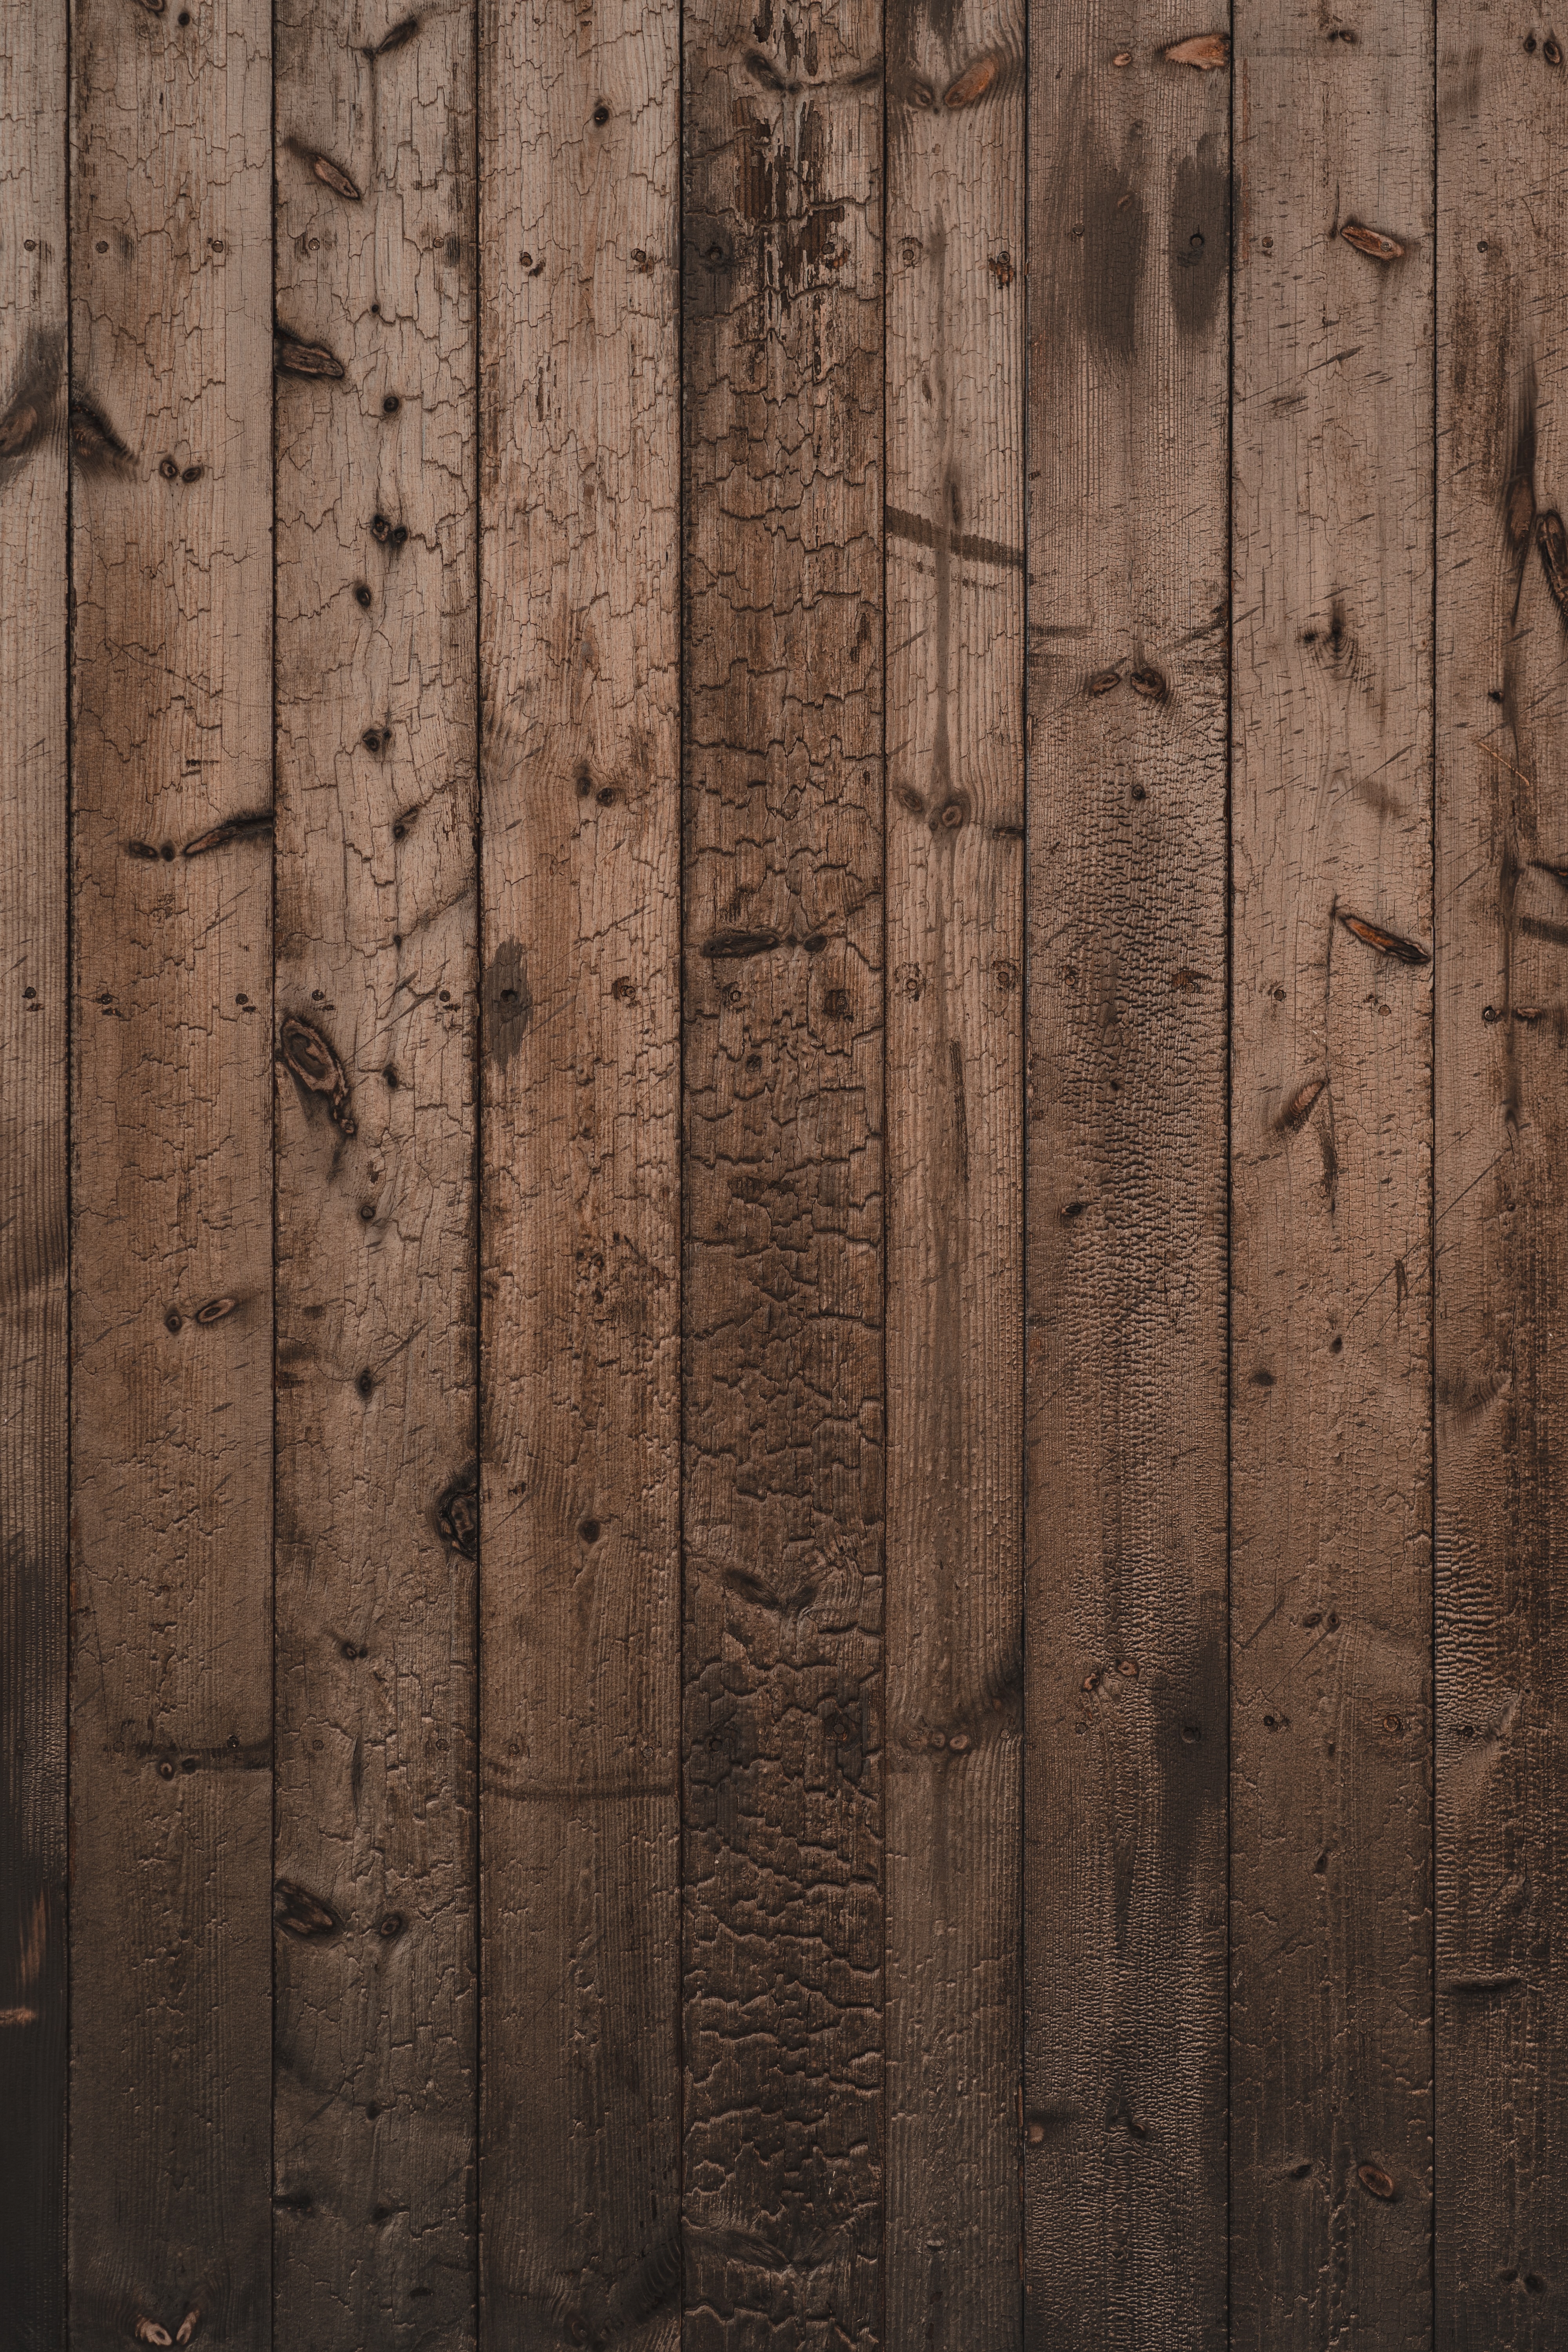 wood, tree, texture, textures, brown, surface, planks, board